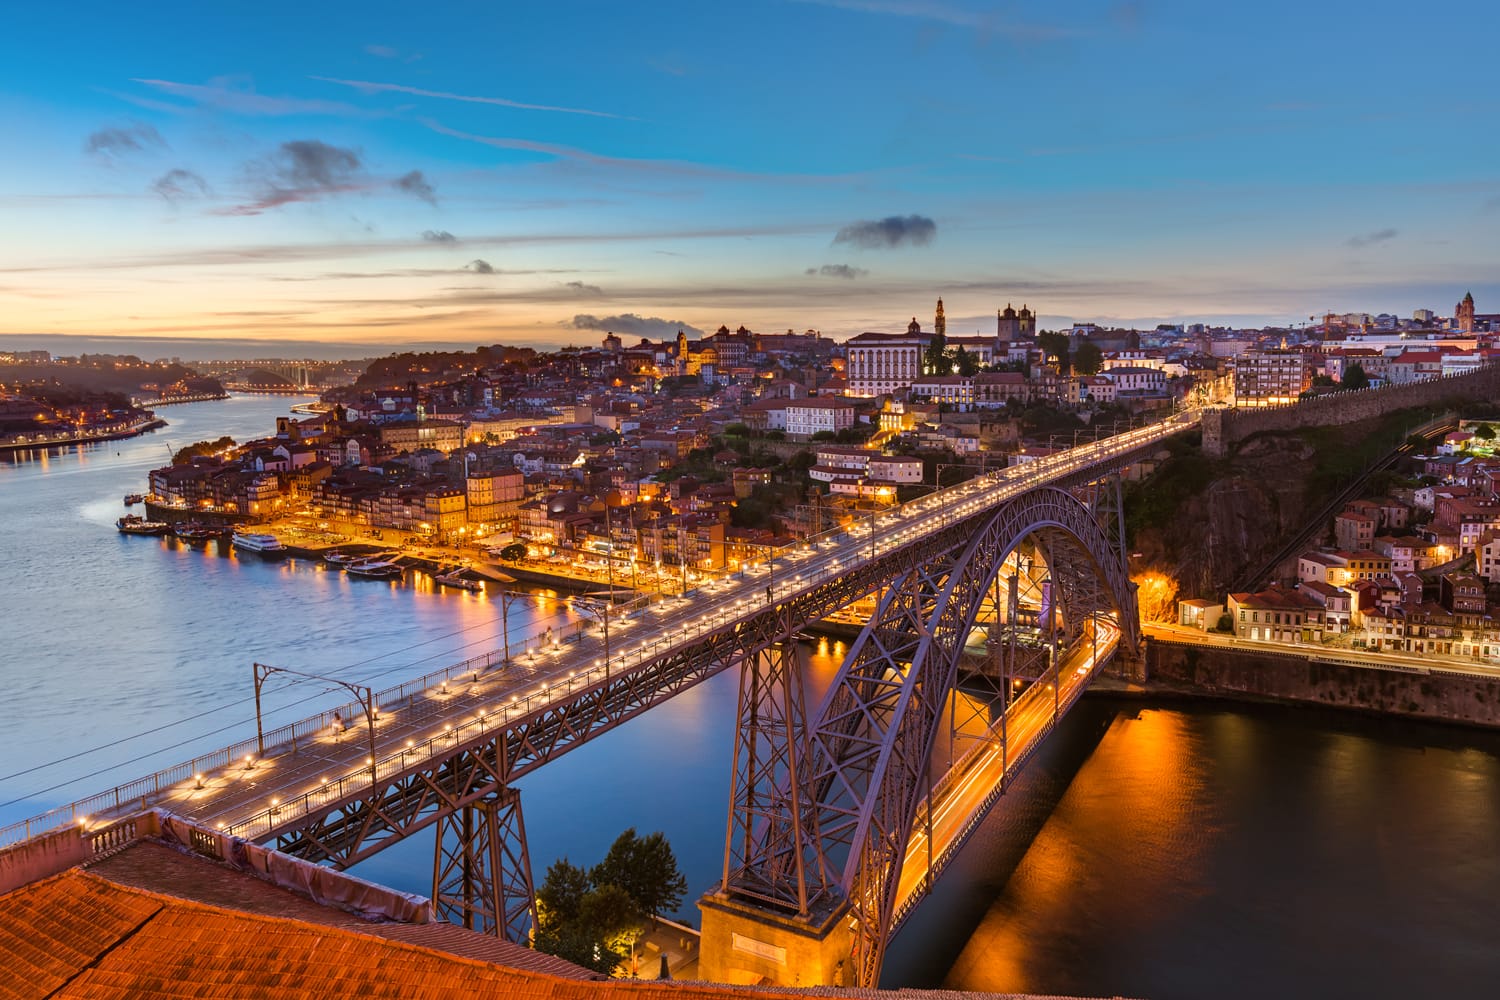 Sunset view over Porto, Portugal